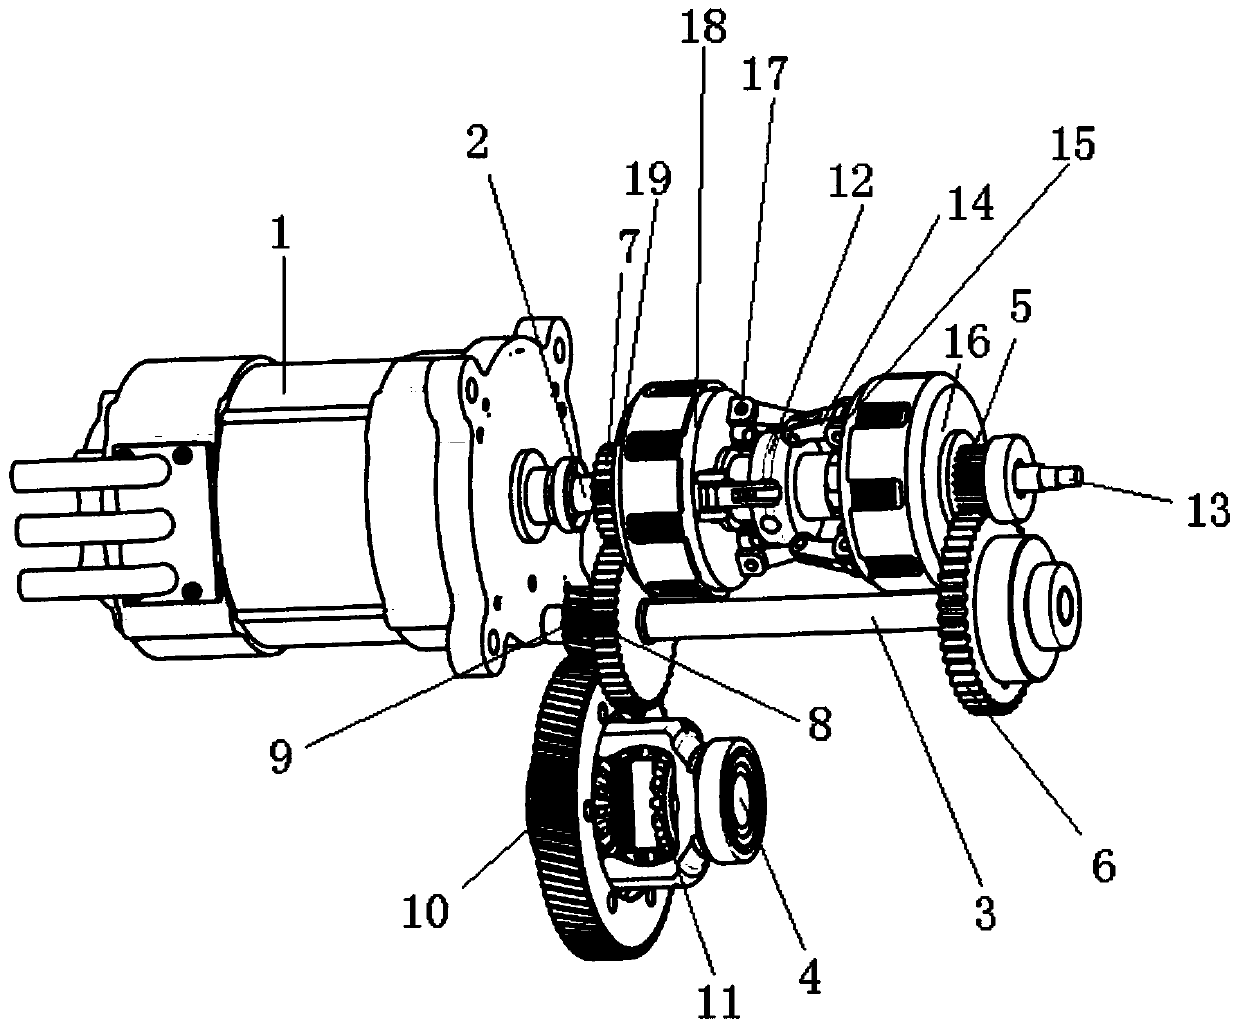 Double clutch gearbox and double clutch speed change method